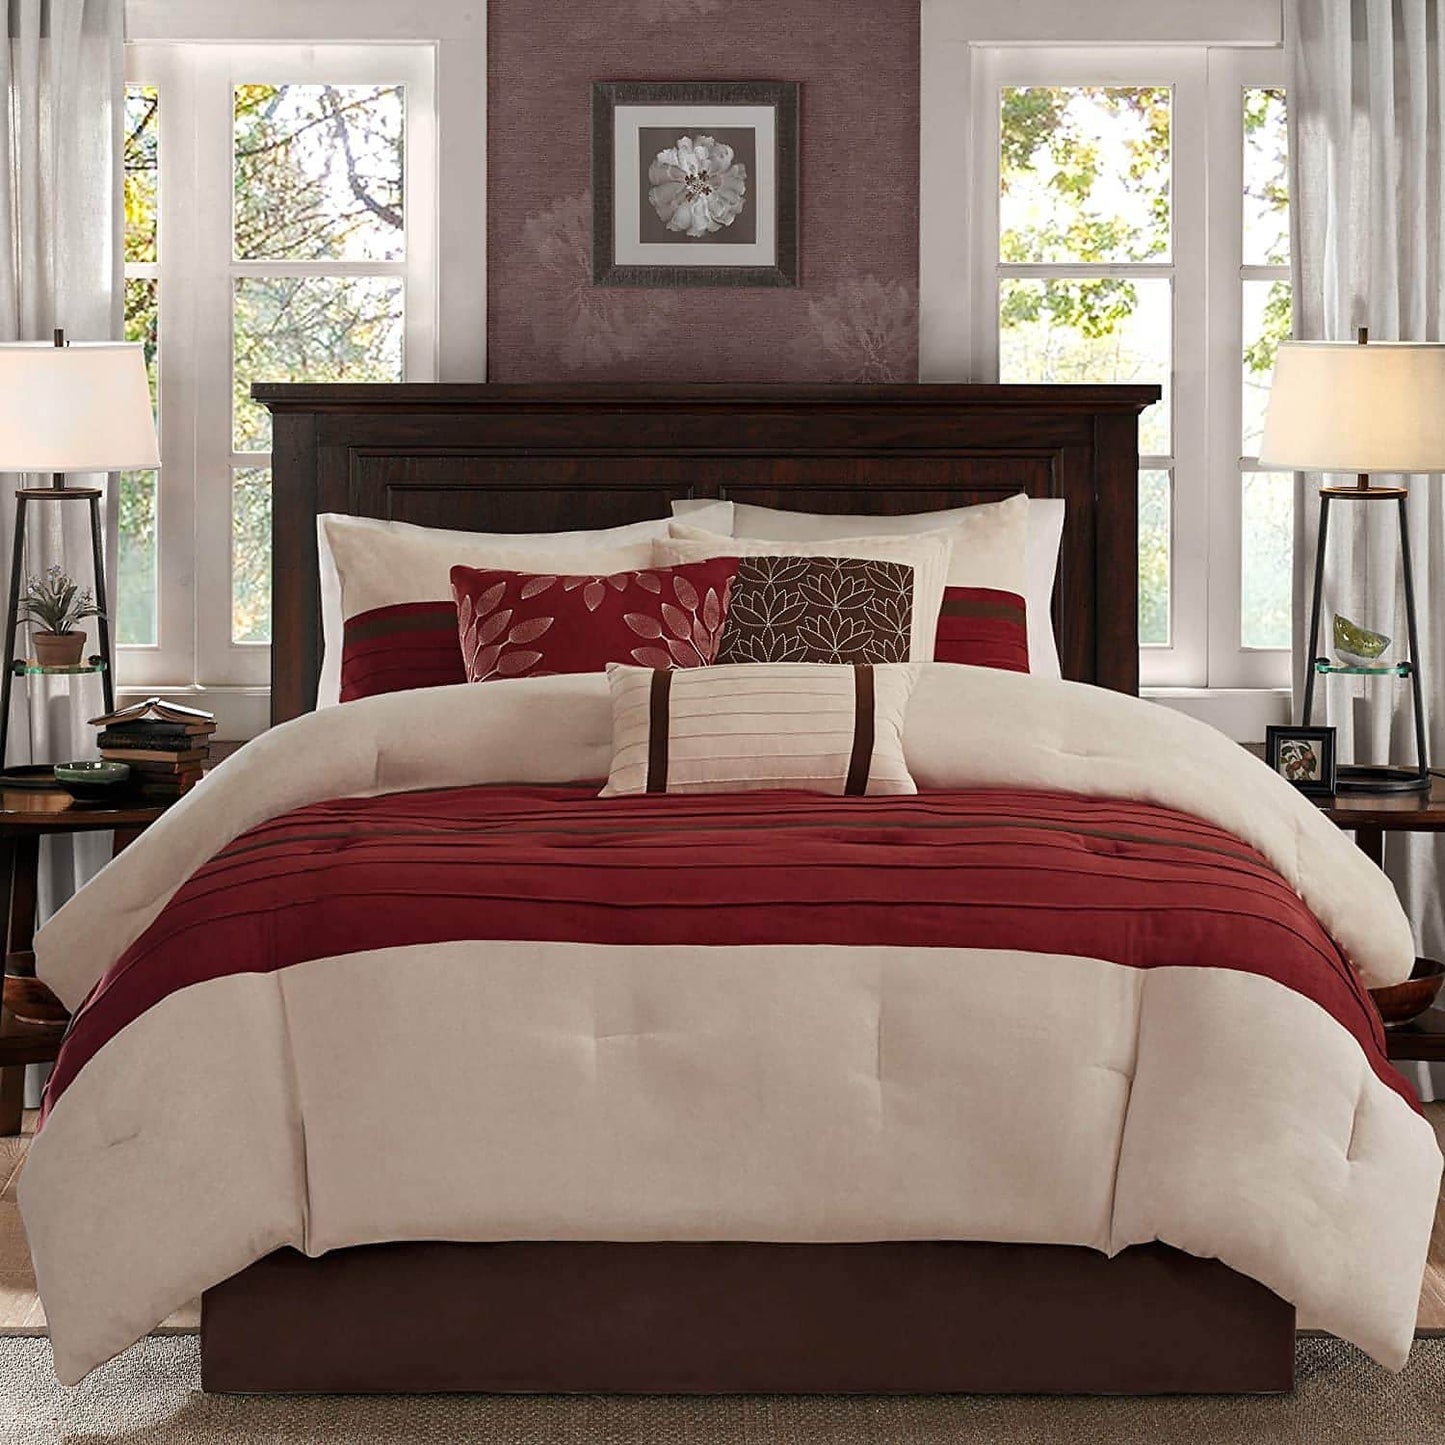 Madison Park - Palmer 7 Piece Comforter Set - Red - Queen - Pieced Microsuede - Includes 1 Comforter, 3 Decorative Pillows, 1 Bed Skirt, 2 Shams - Brandat Outlet